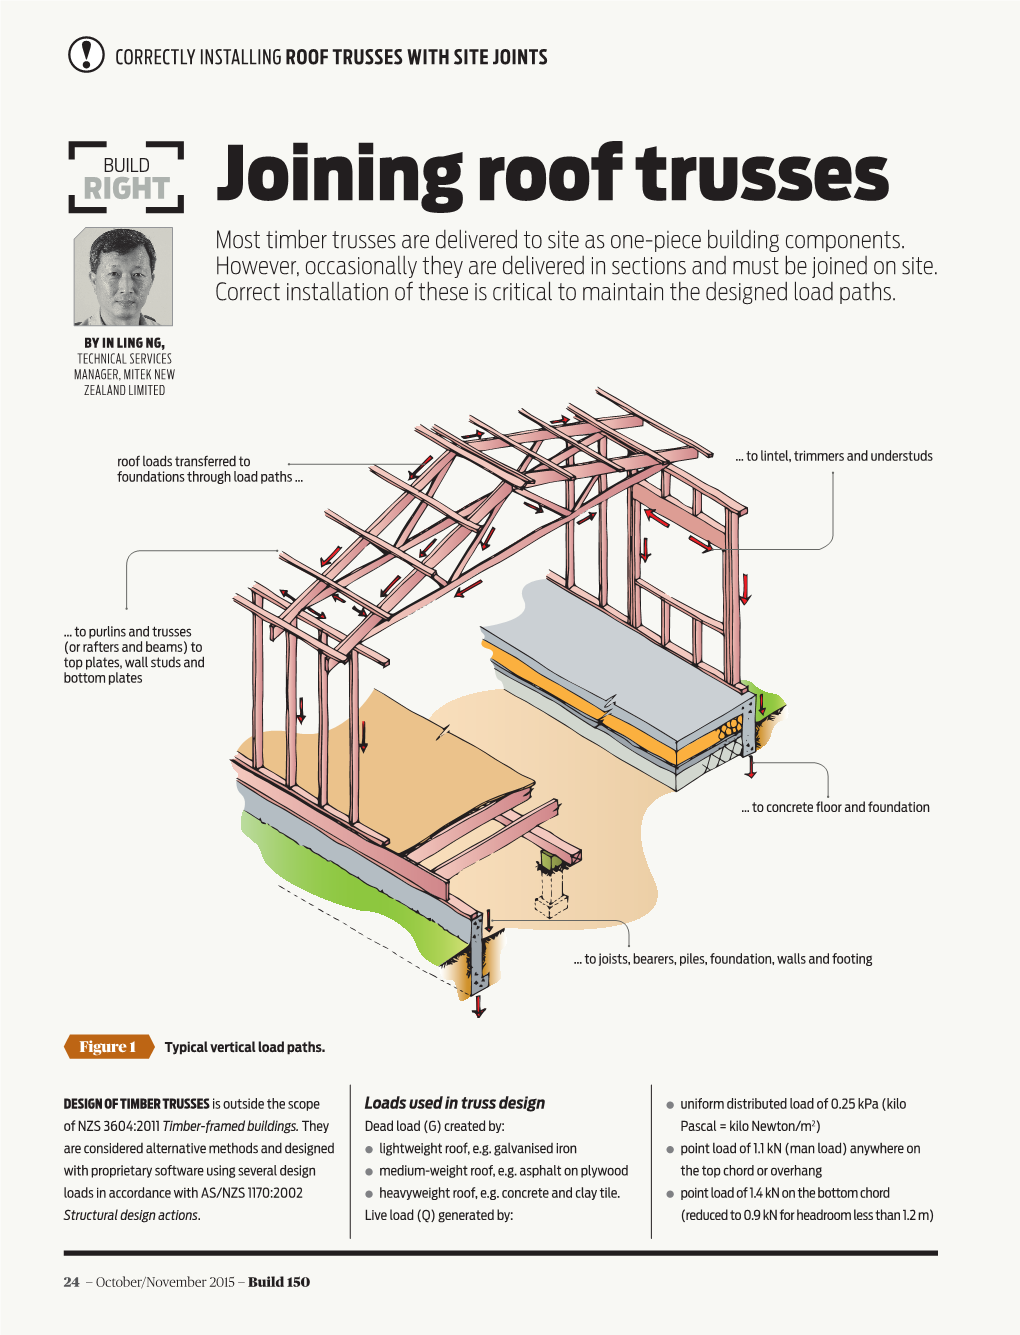 Joining Roof Trusses Most Timber Trusses Are Delivered to Site As One-Piece Building Components